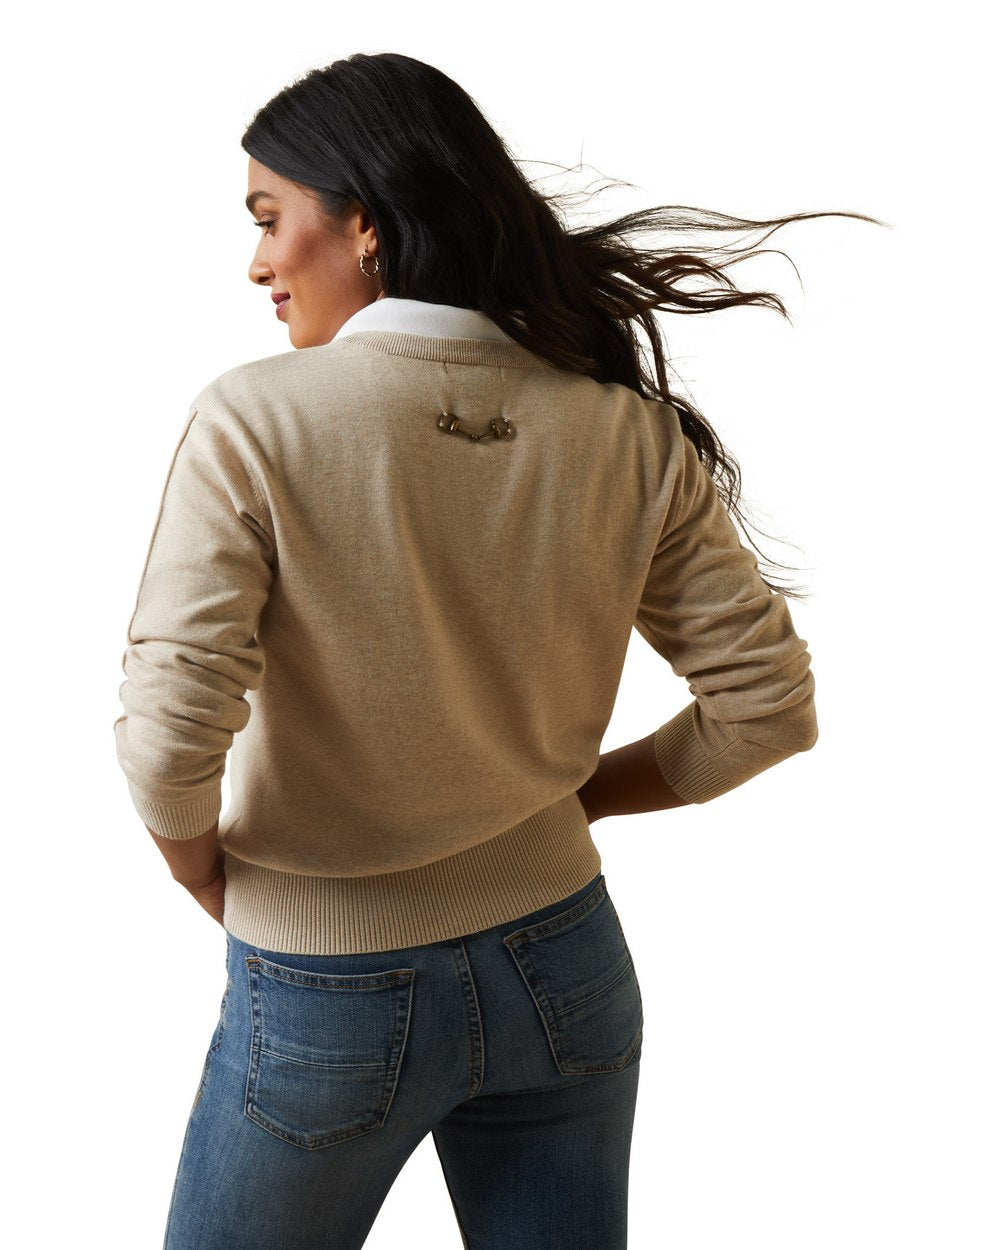 Oatmeal Coloured Ariat Womens Peninsula Sweater On A White Background 